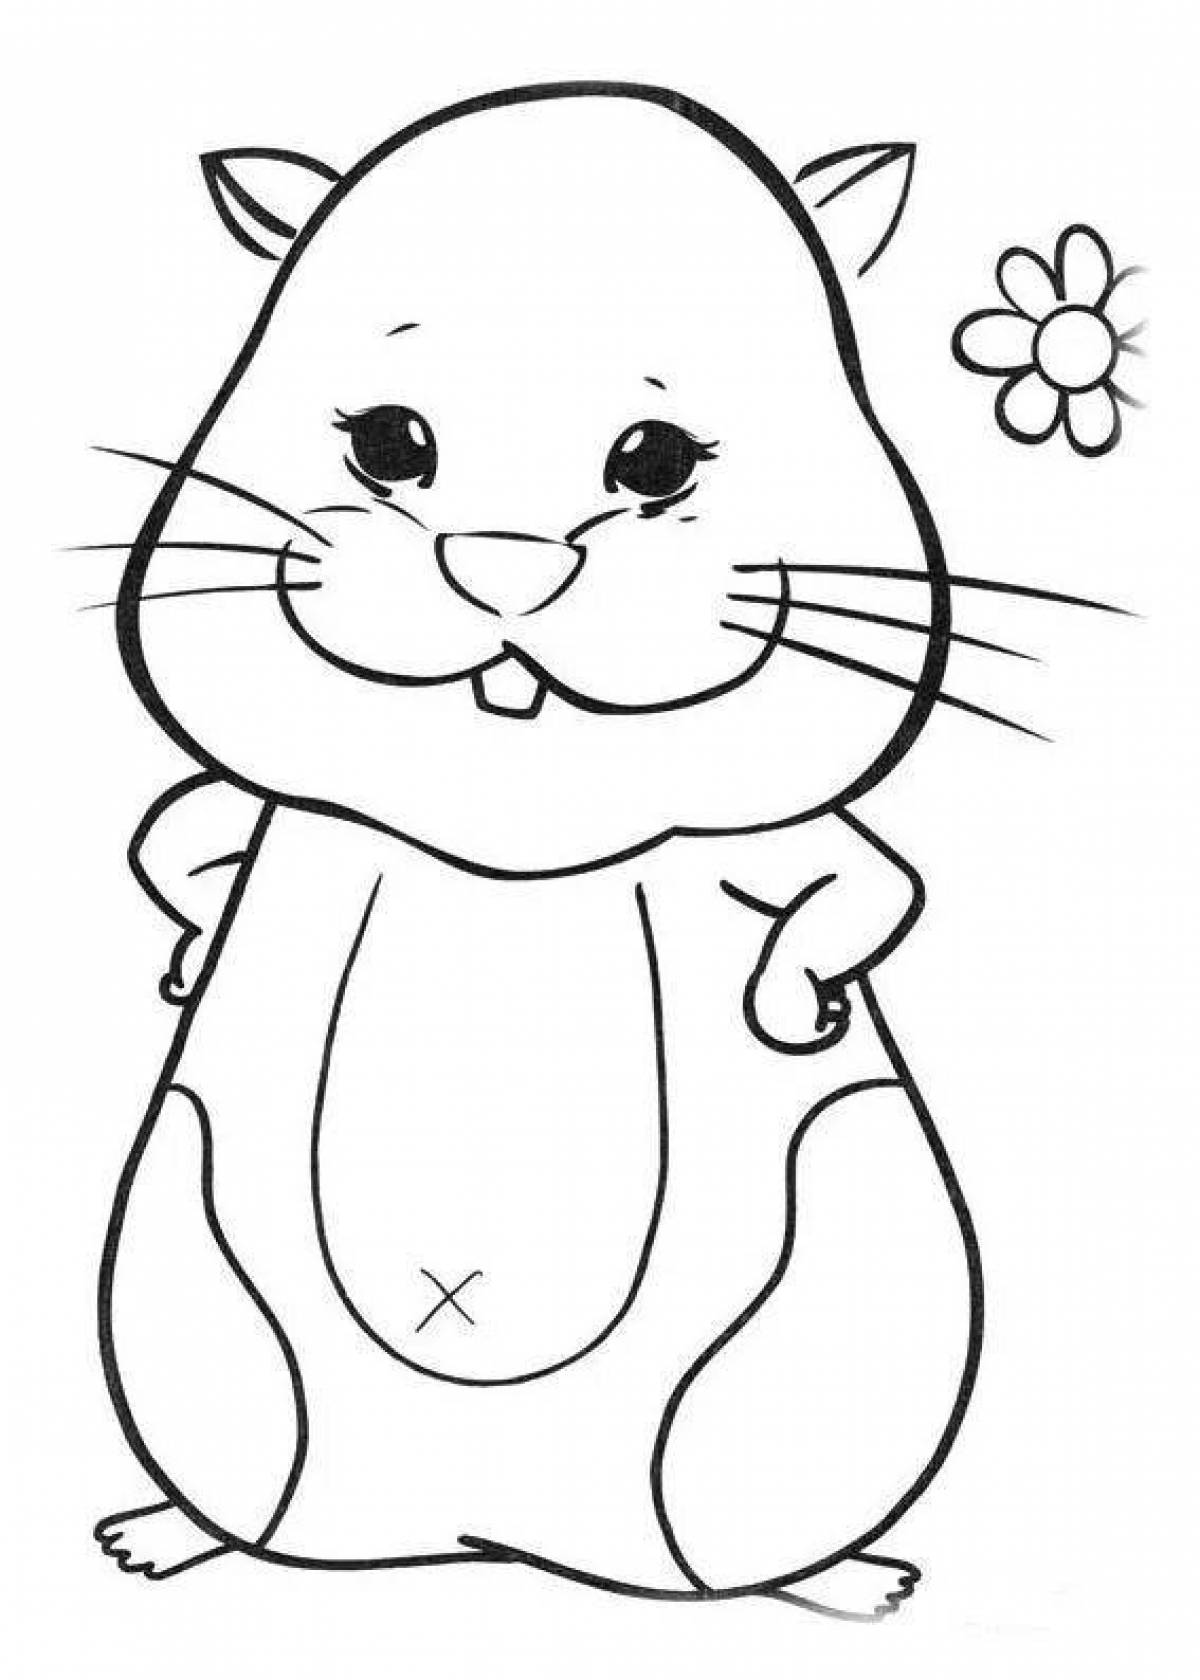 Curious hamster coloring book